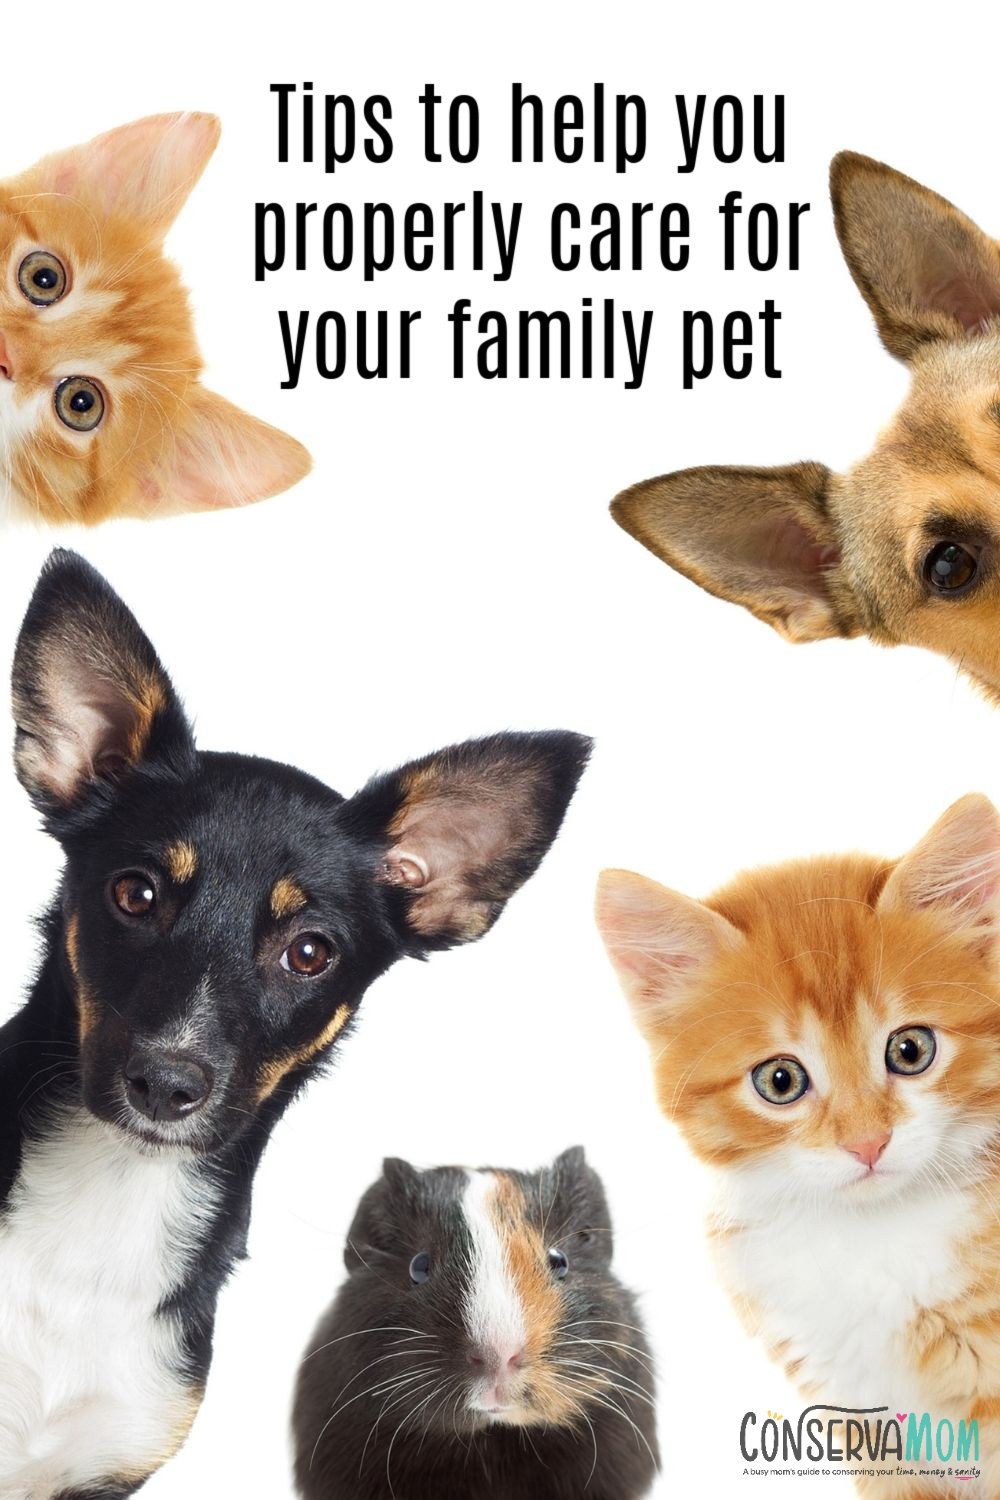 Tips to help you properly care for your family pet